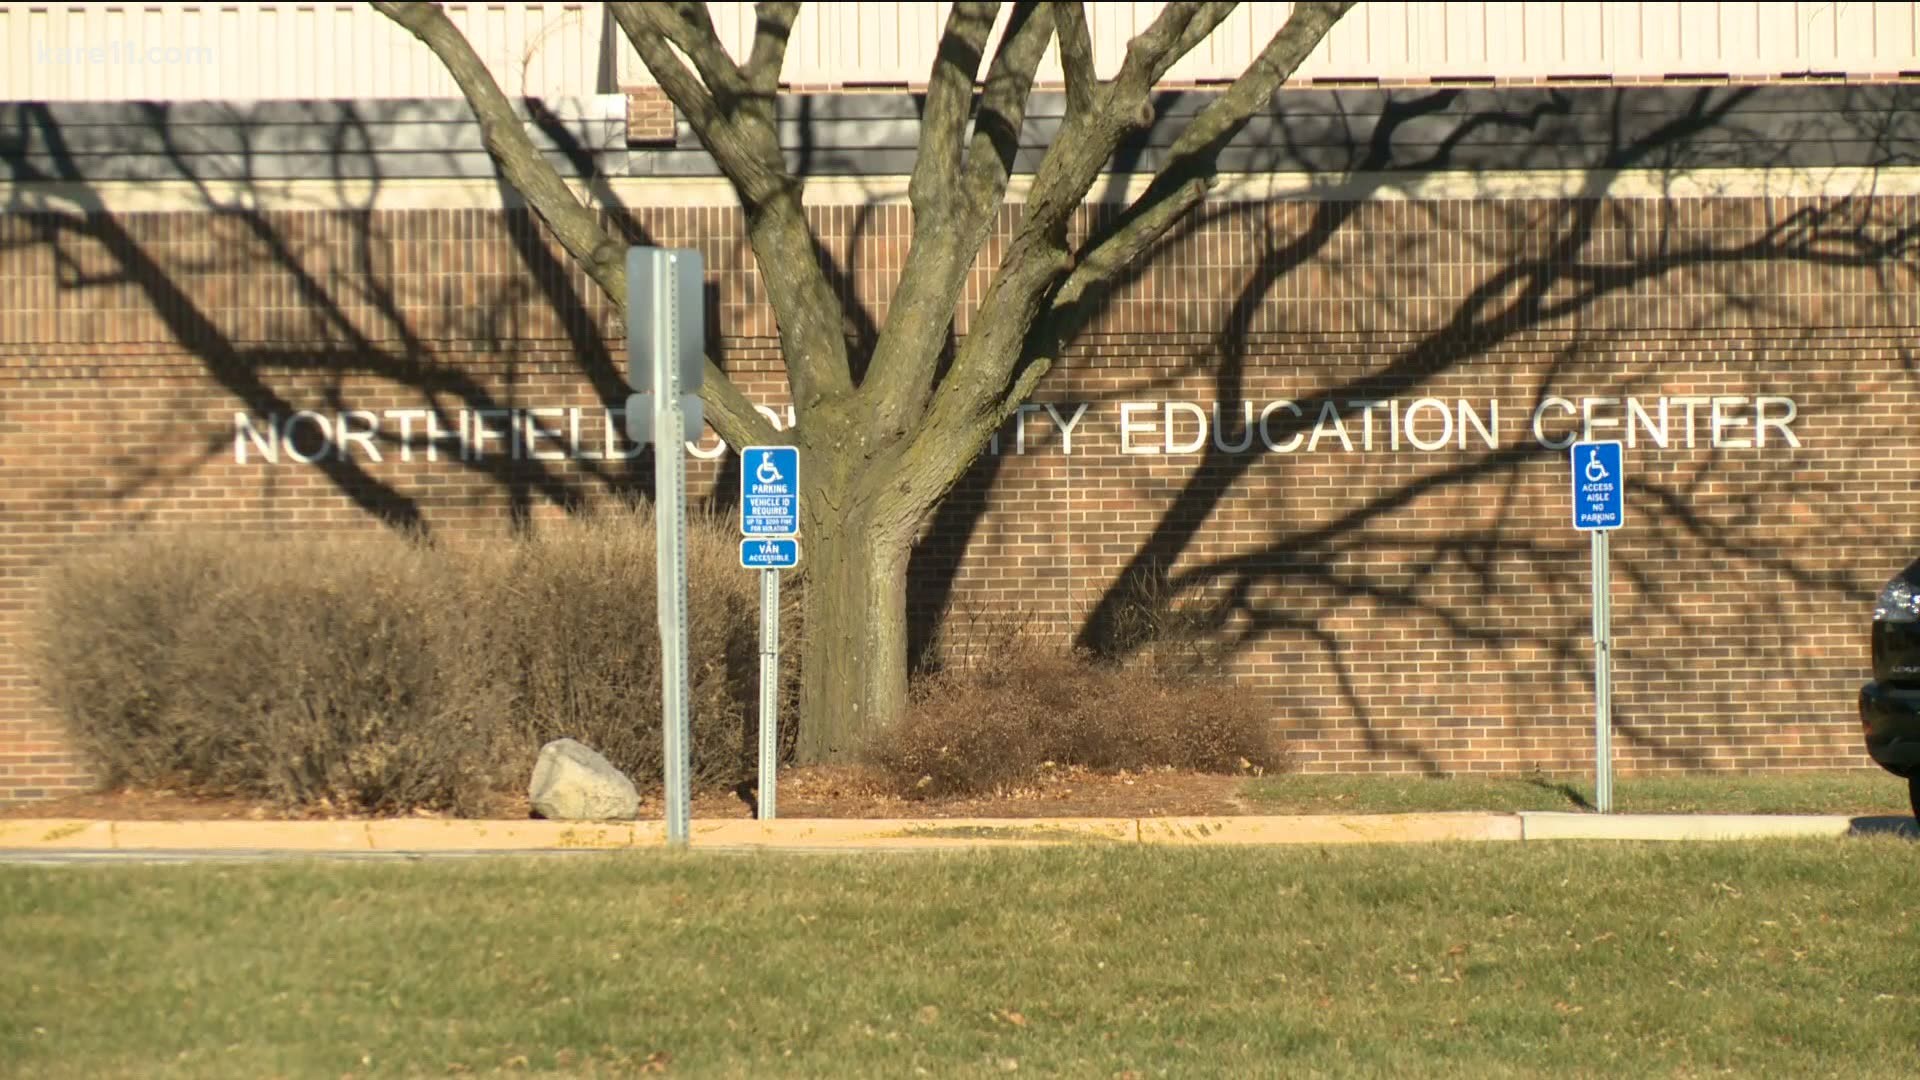 An employee with Northfield Public Schools has been fired after being suspected of putting melatonin in the bottle of at least one infant under their care